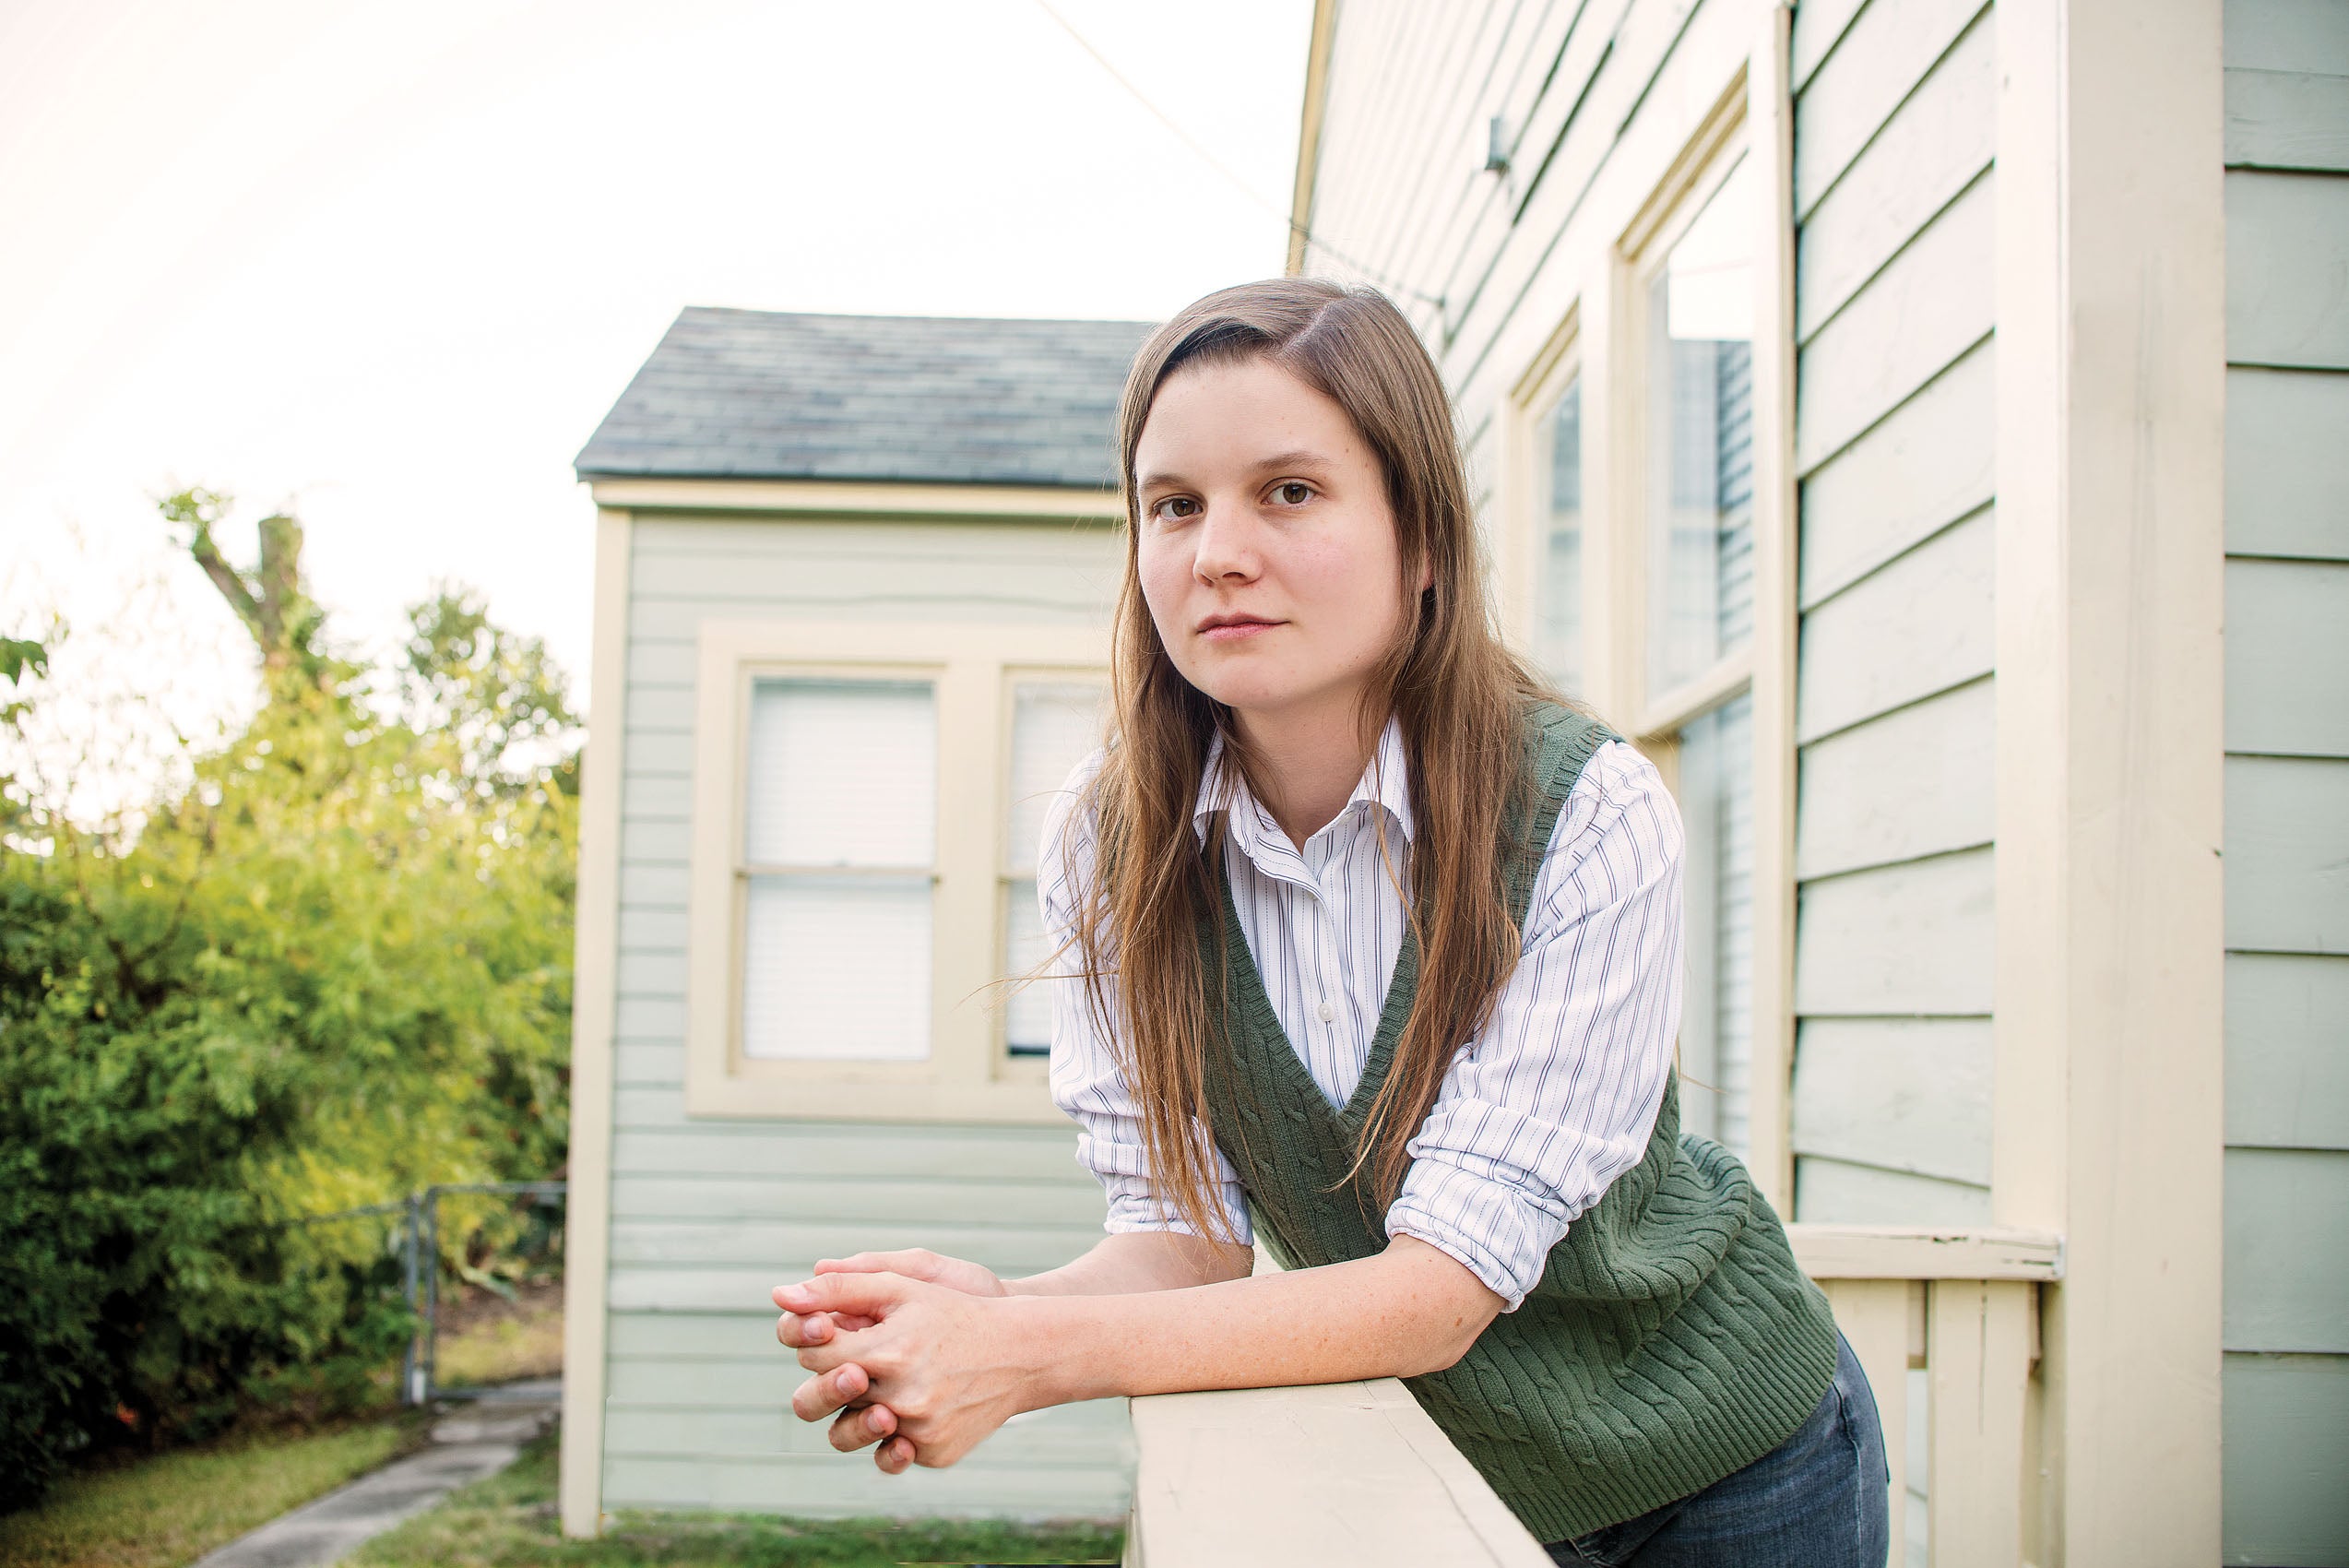 Photograph of Brianna Rennix '18 outside leaning on a porch ledge.